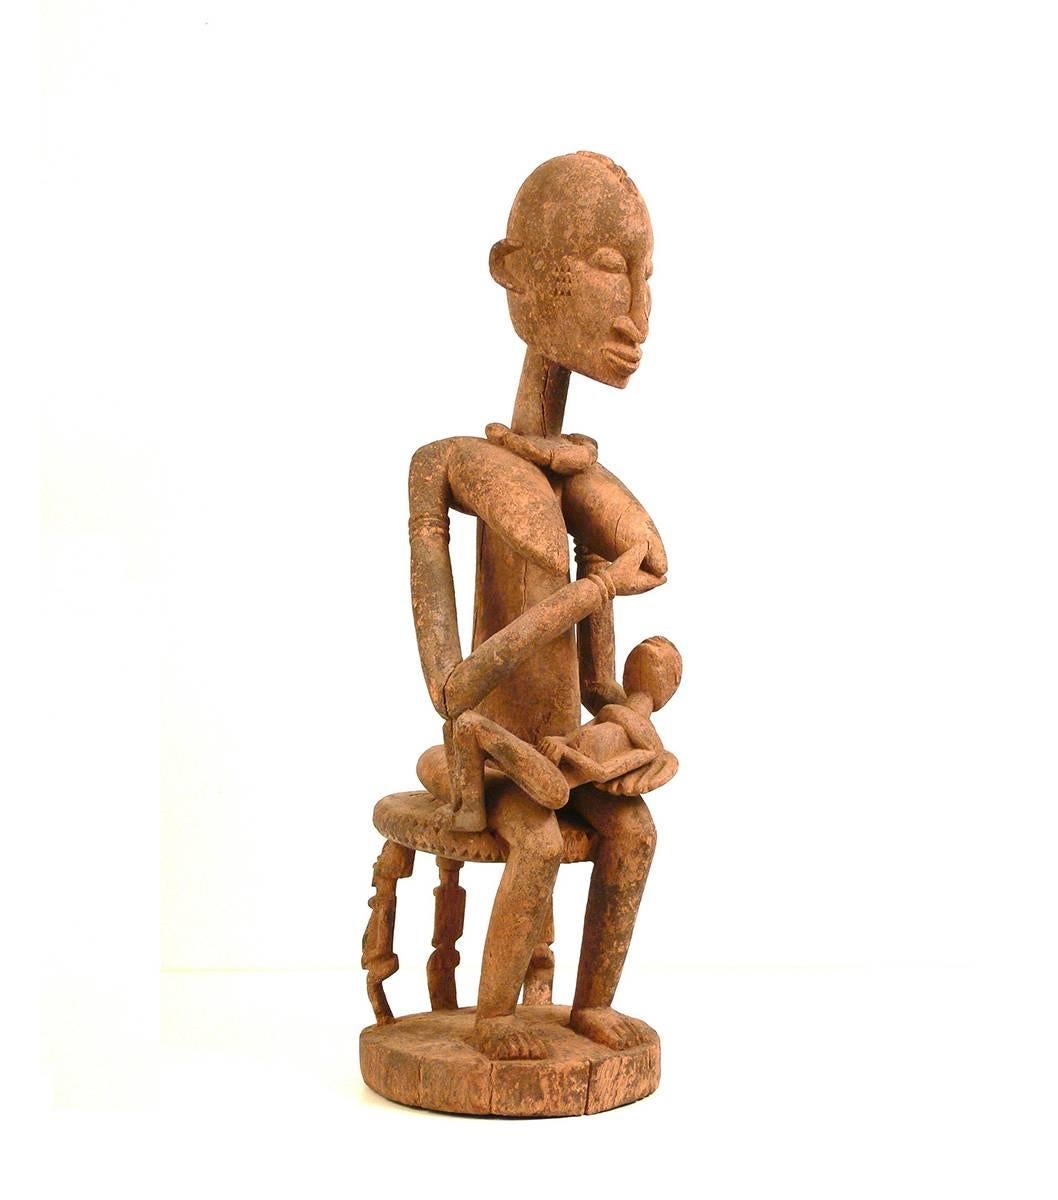 This old maternity figure represents in a fine work of art the mythical ancestor and symbolically the feminine ideals of beauty and fertility. This kind of wooden statues were commonly used as shrine figures, in order to ensure births and prosperity